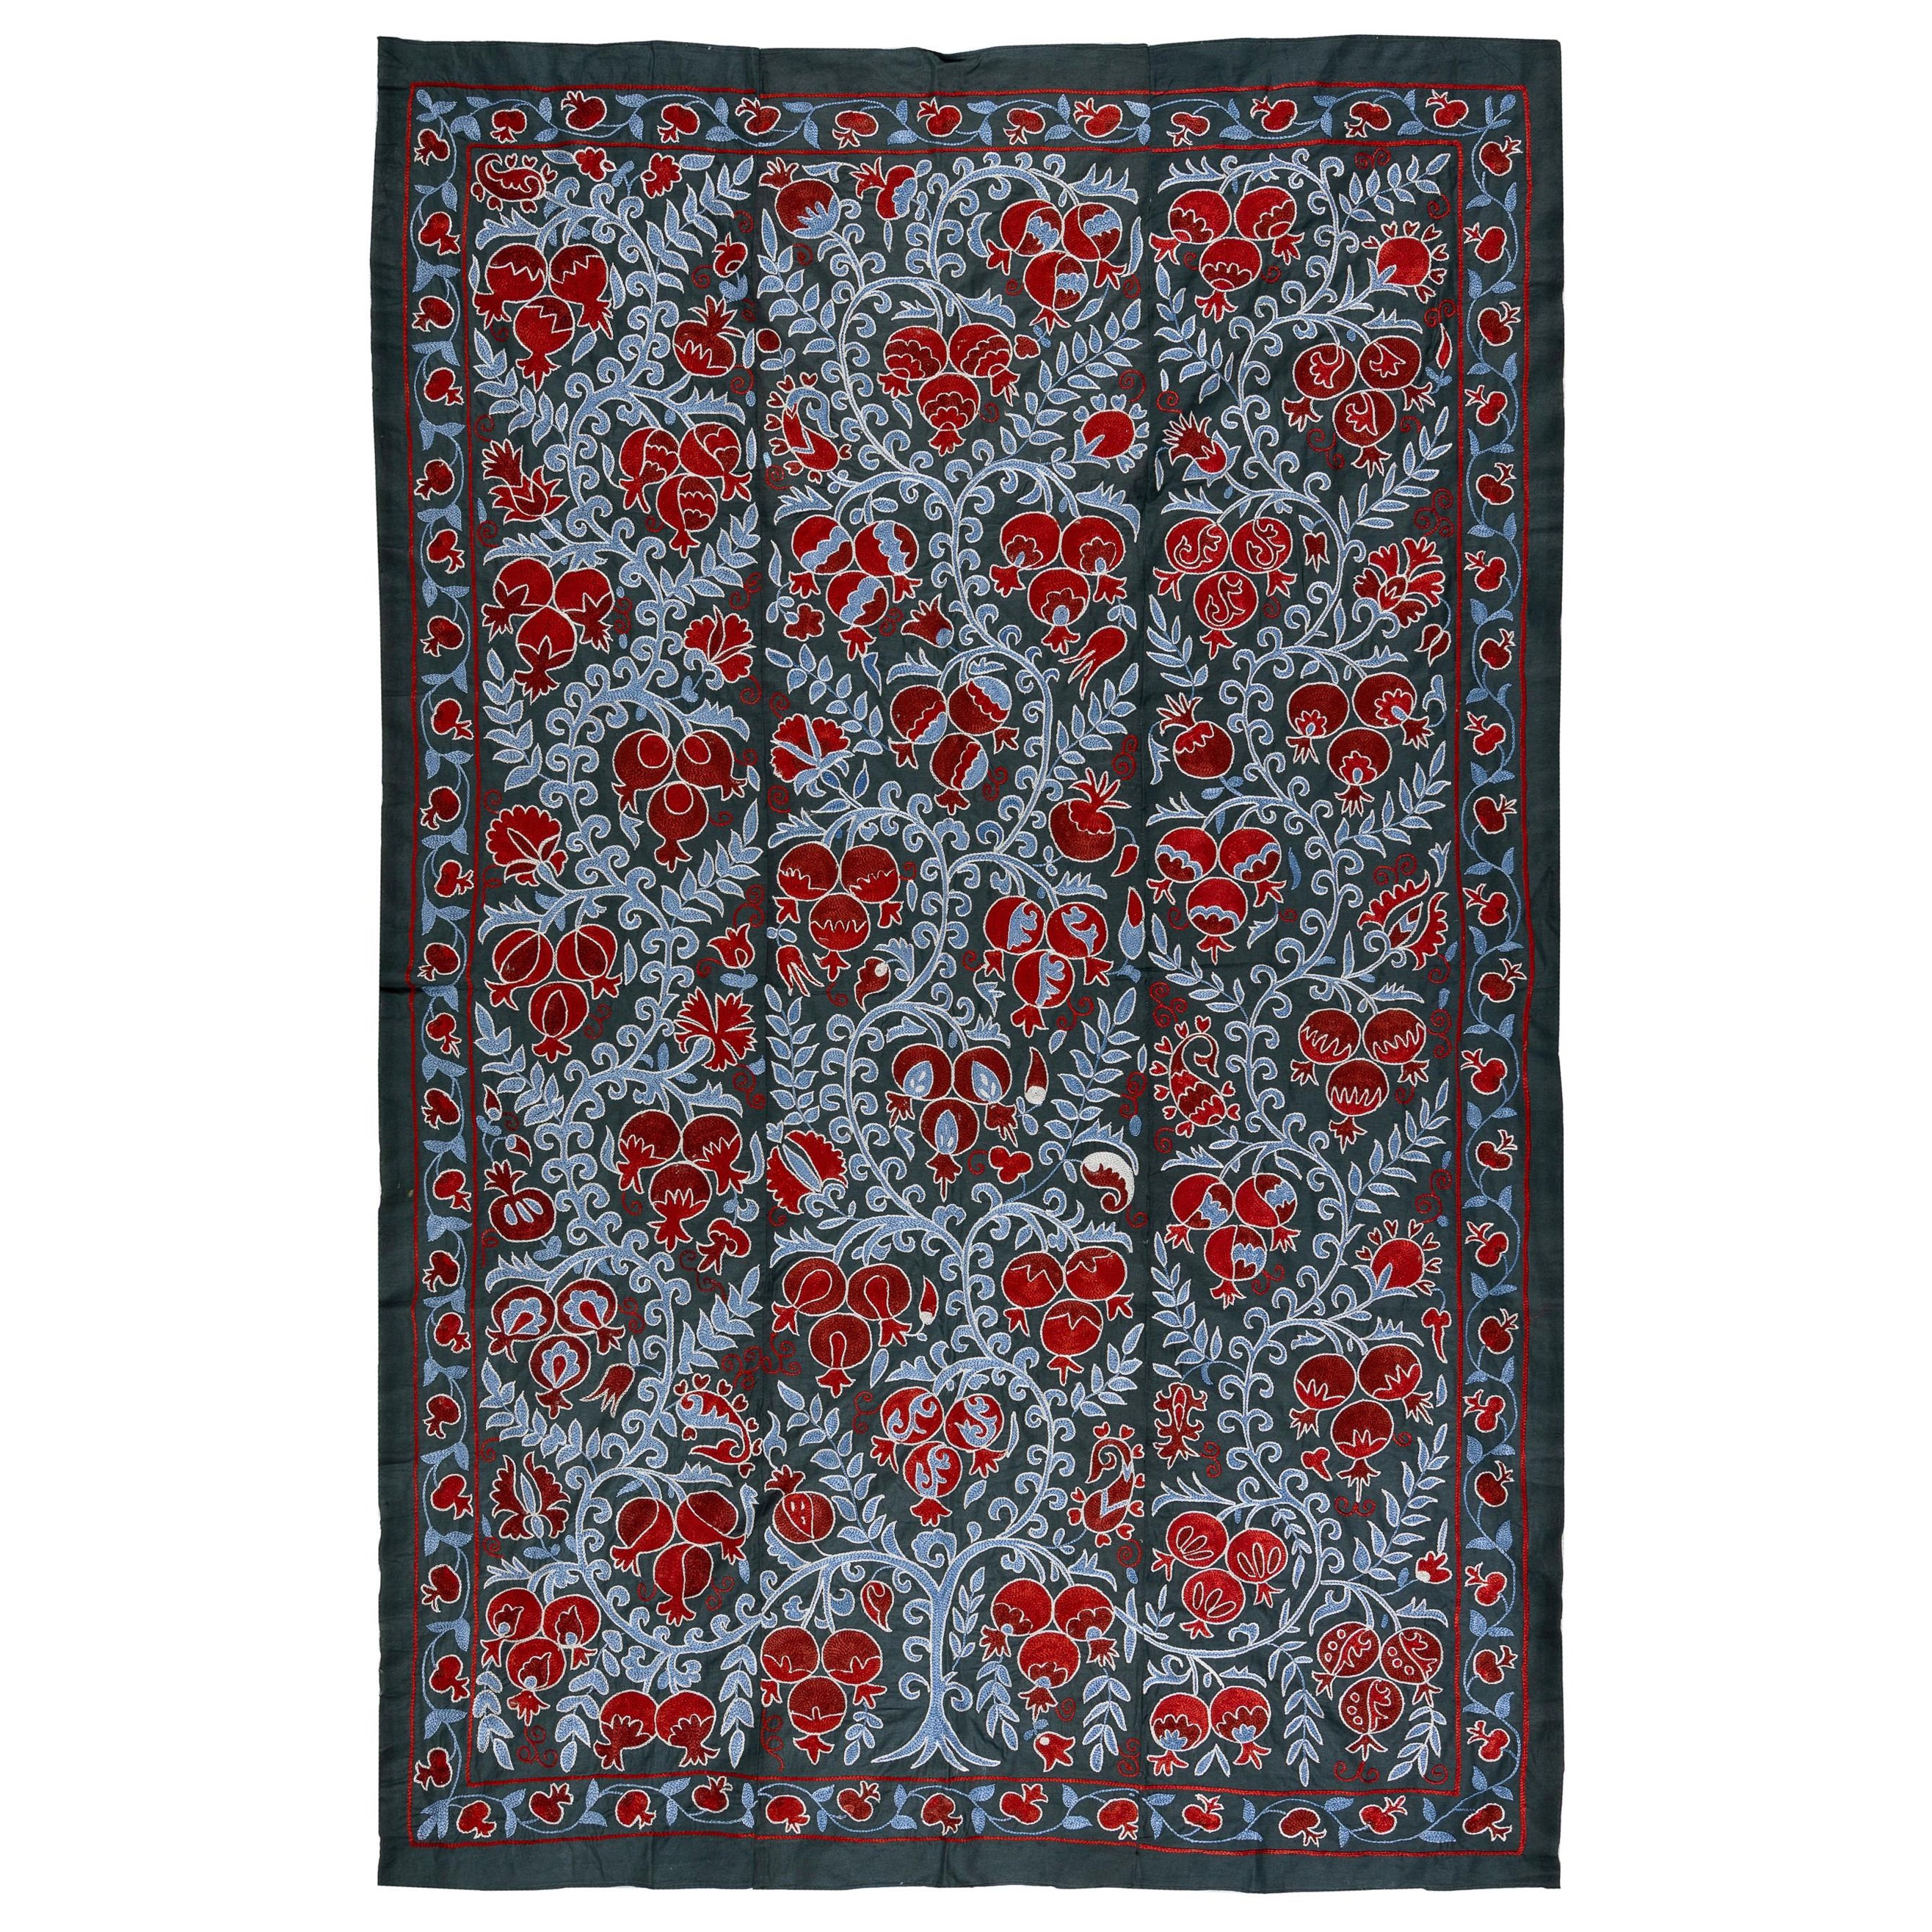 Uzbek Suzani Textile, Embroidered Cotton & Silk Wall Hanging, Bed Cover